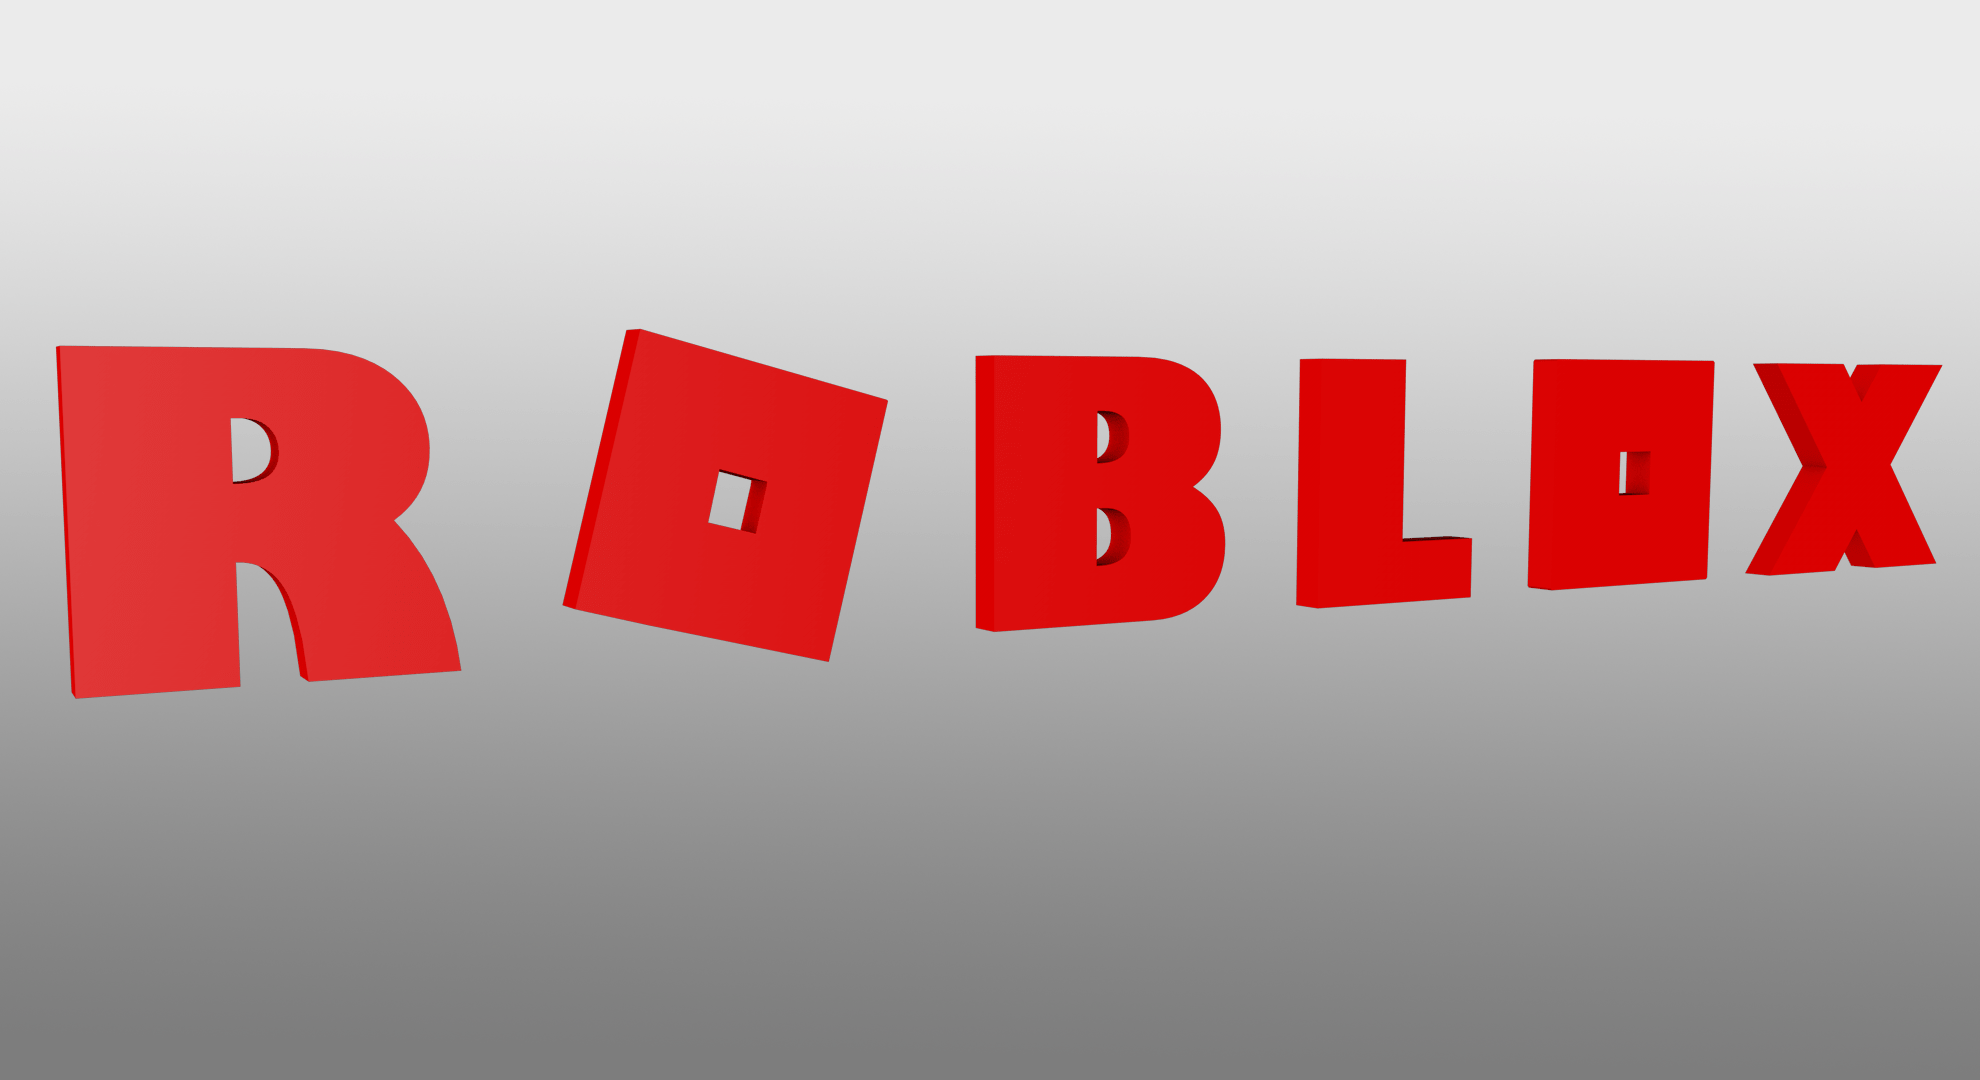 Roblox Logo Wallpapers Top Free Roblox Logo Backgrounds Wallpaperaccess